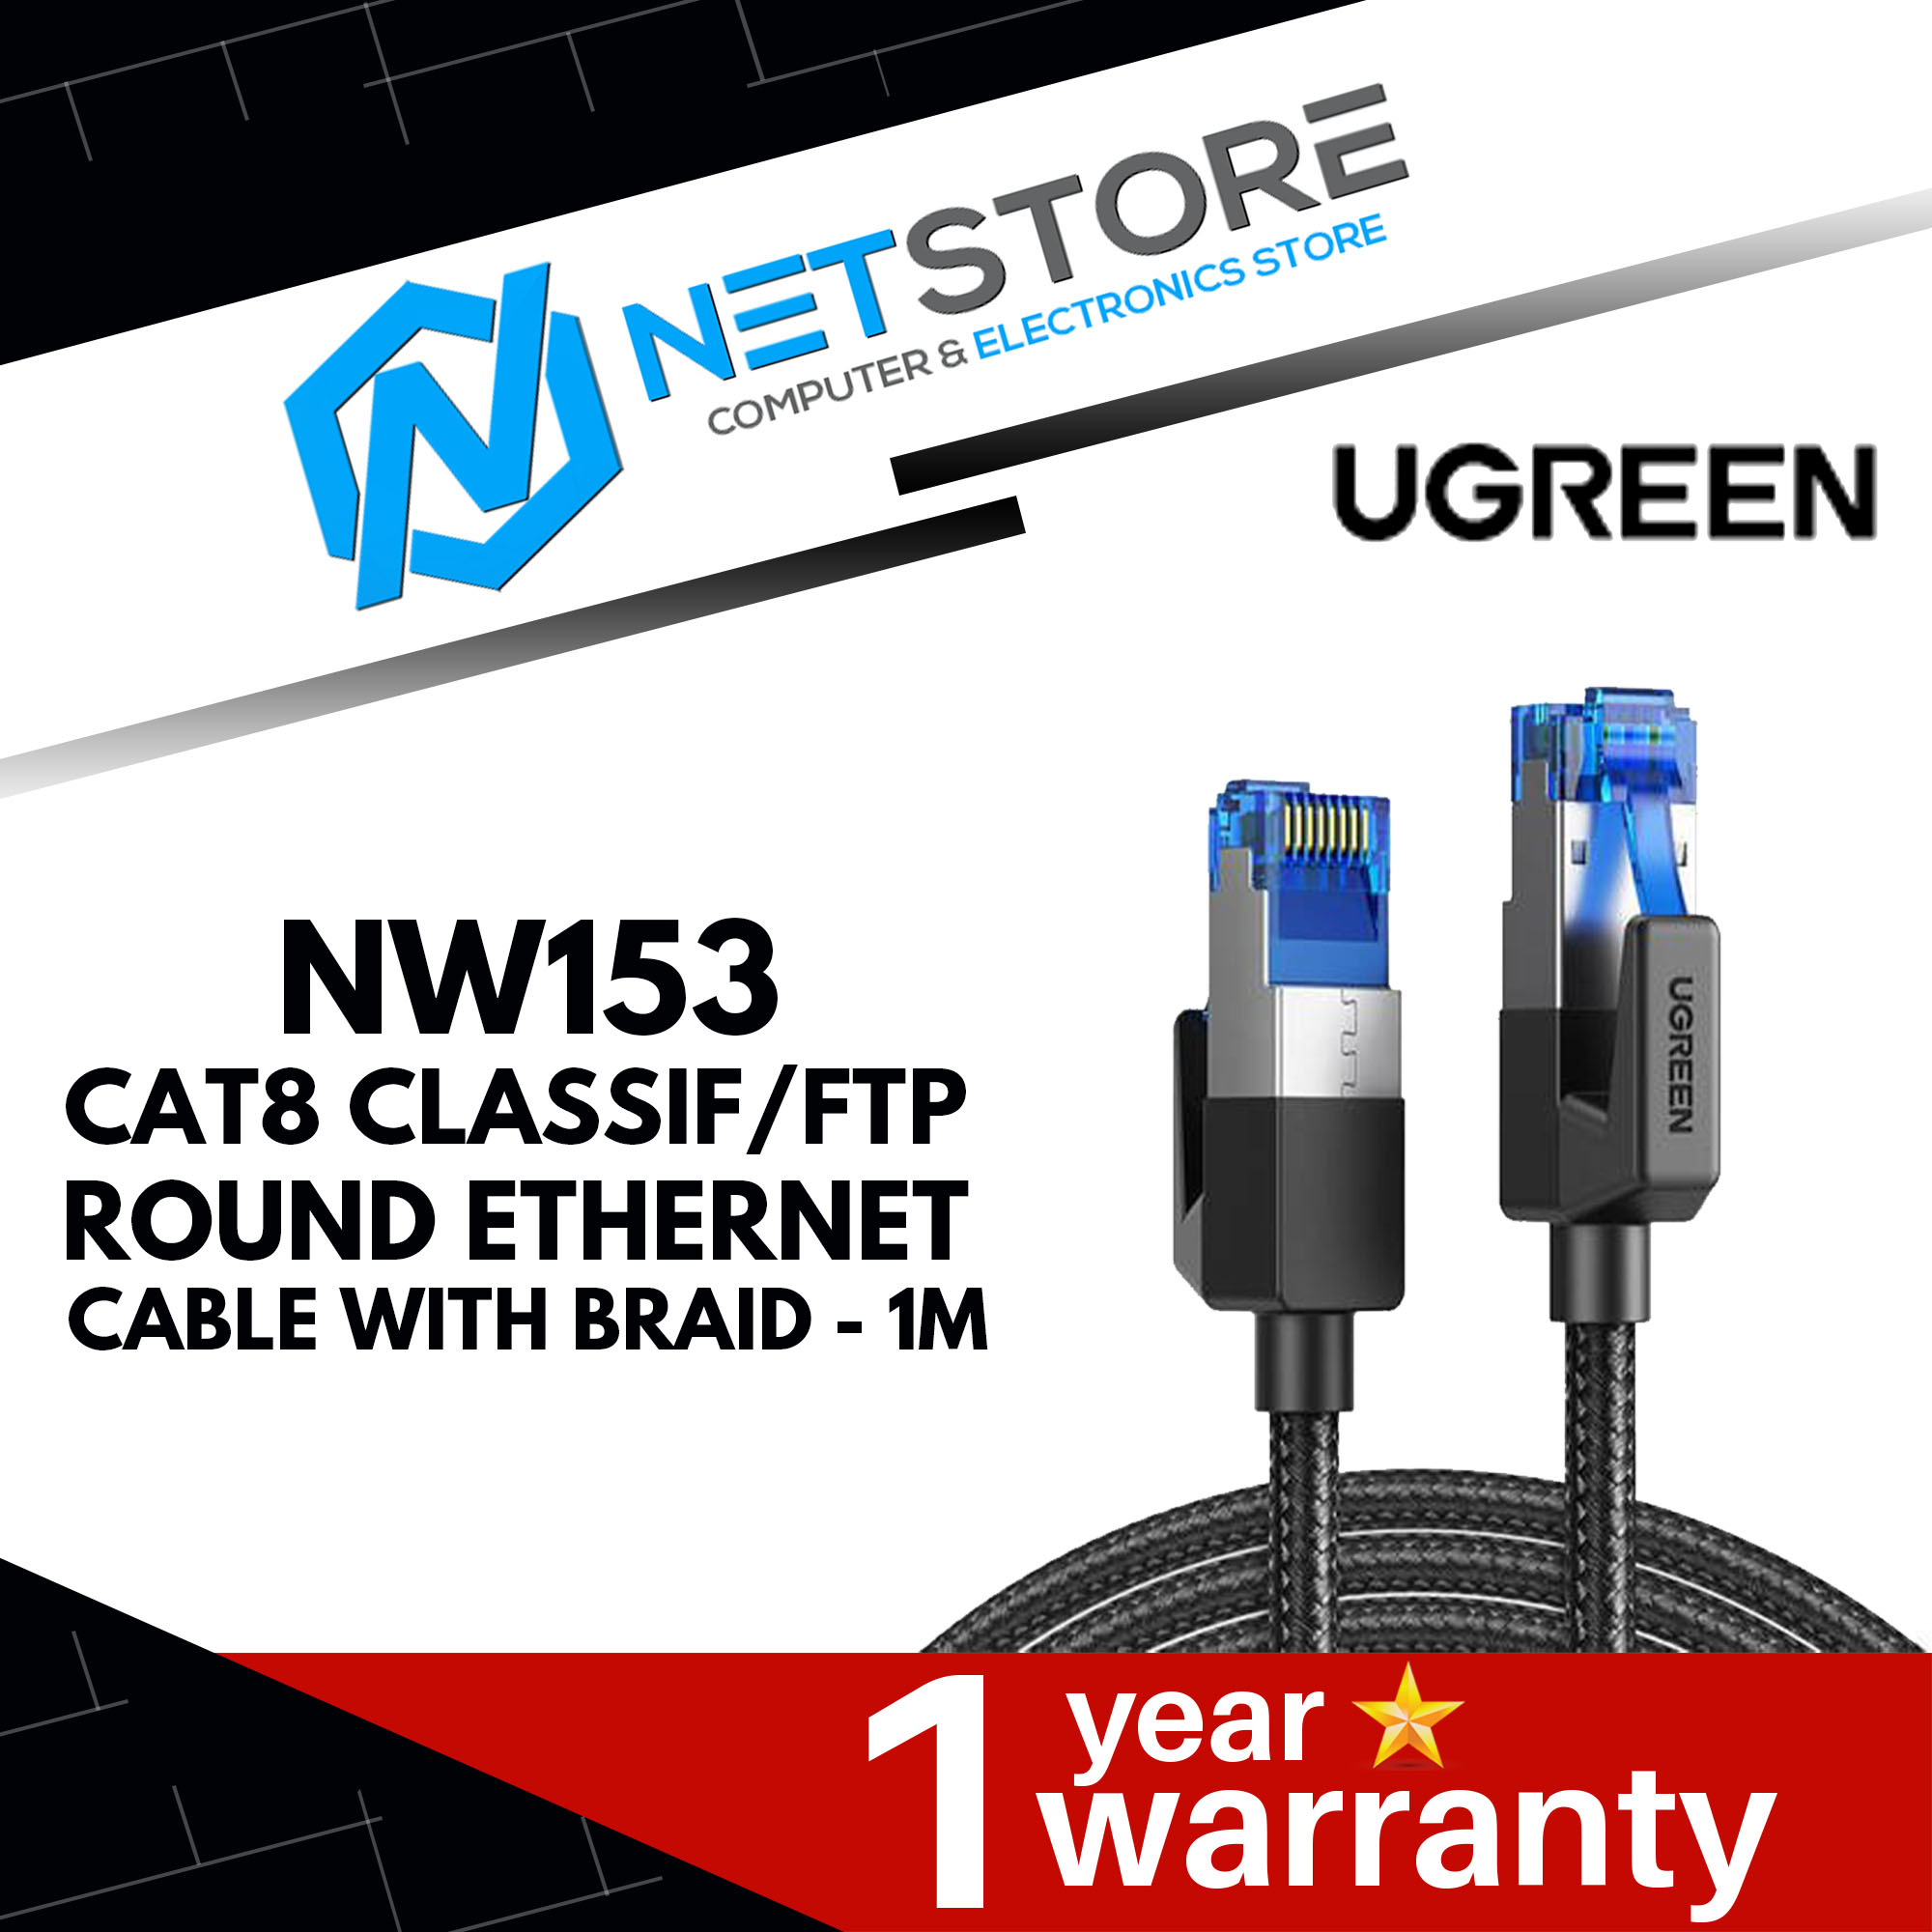 UGREEN NW153 CAT8 CLASSIF/FTP ROUND ETHERNET CABLE WITH BRAID - 1M